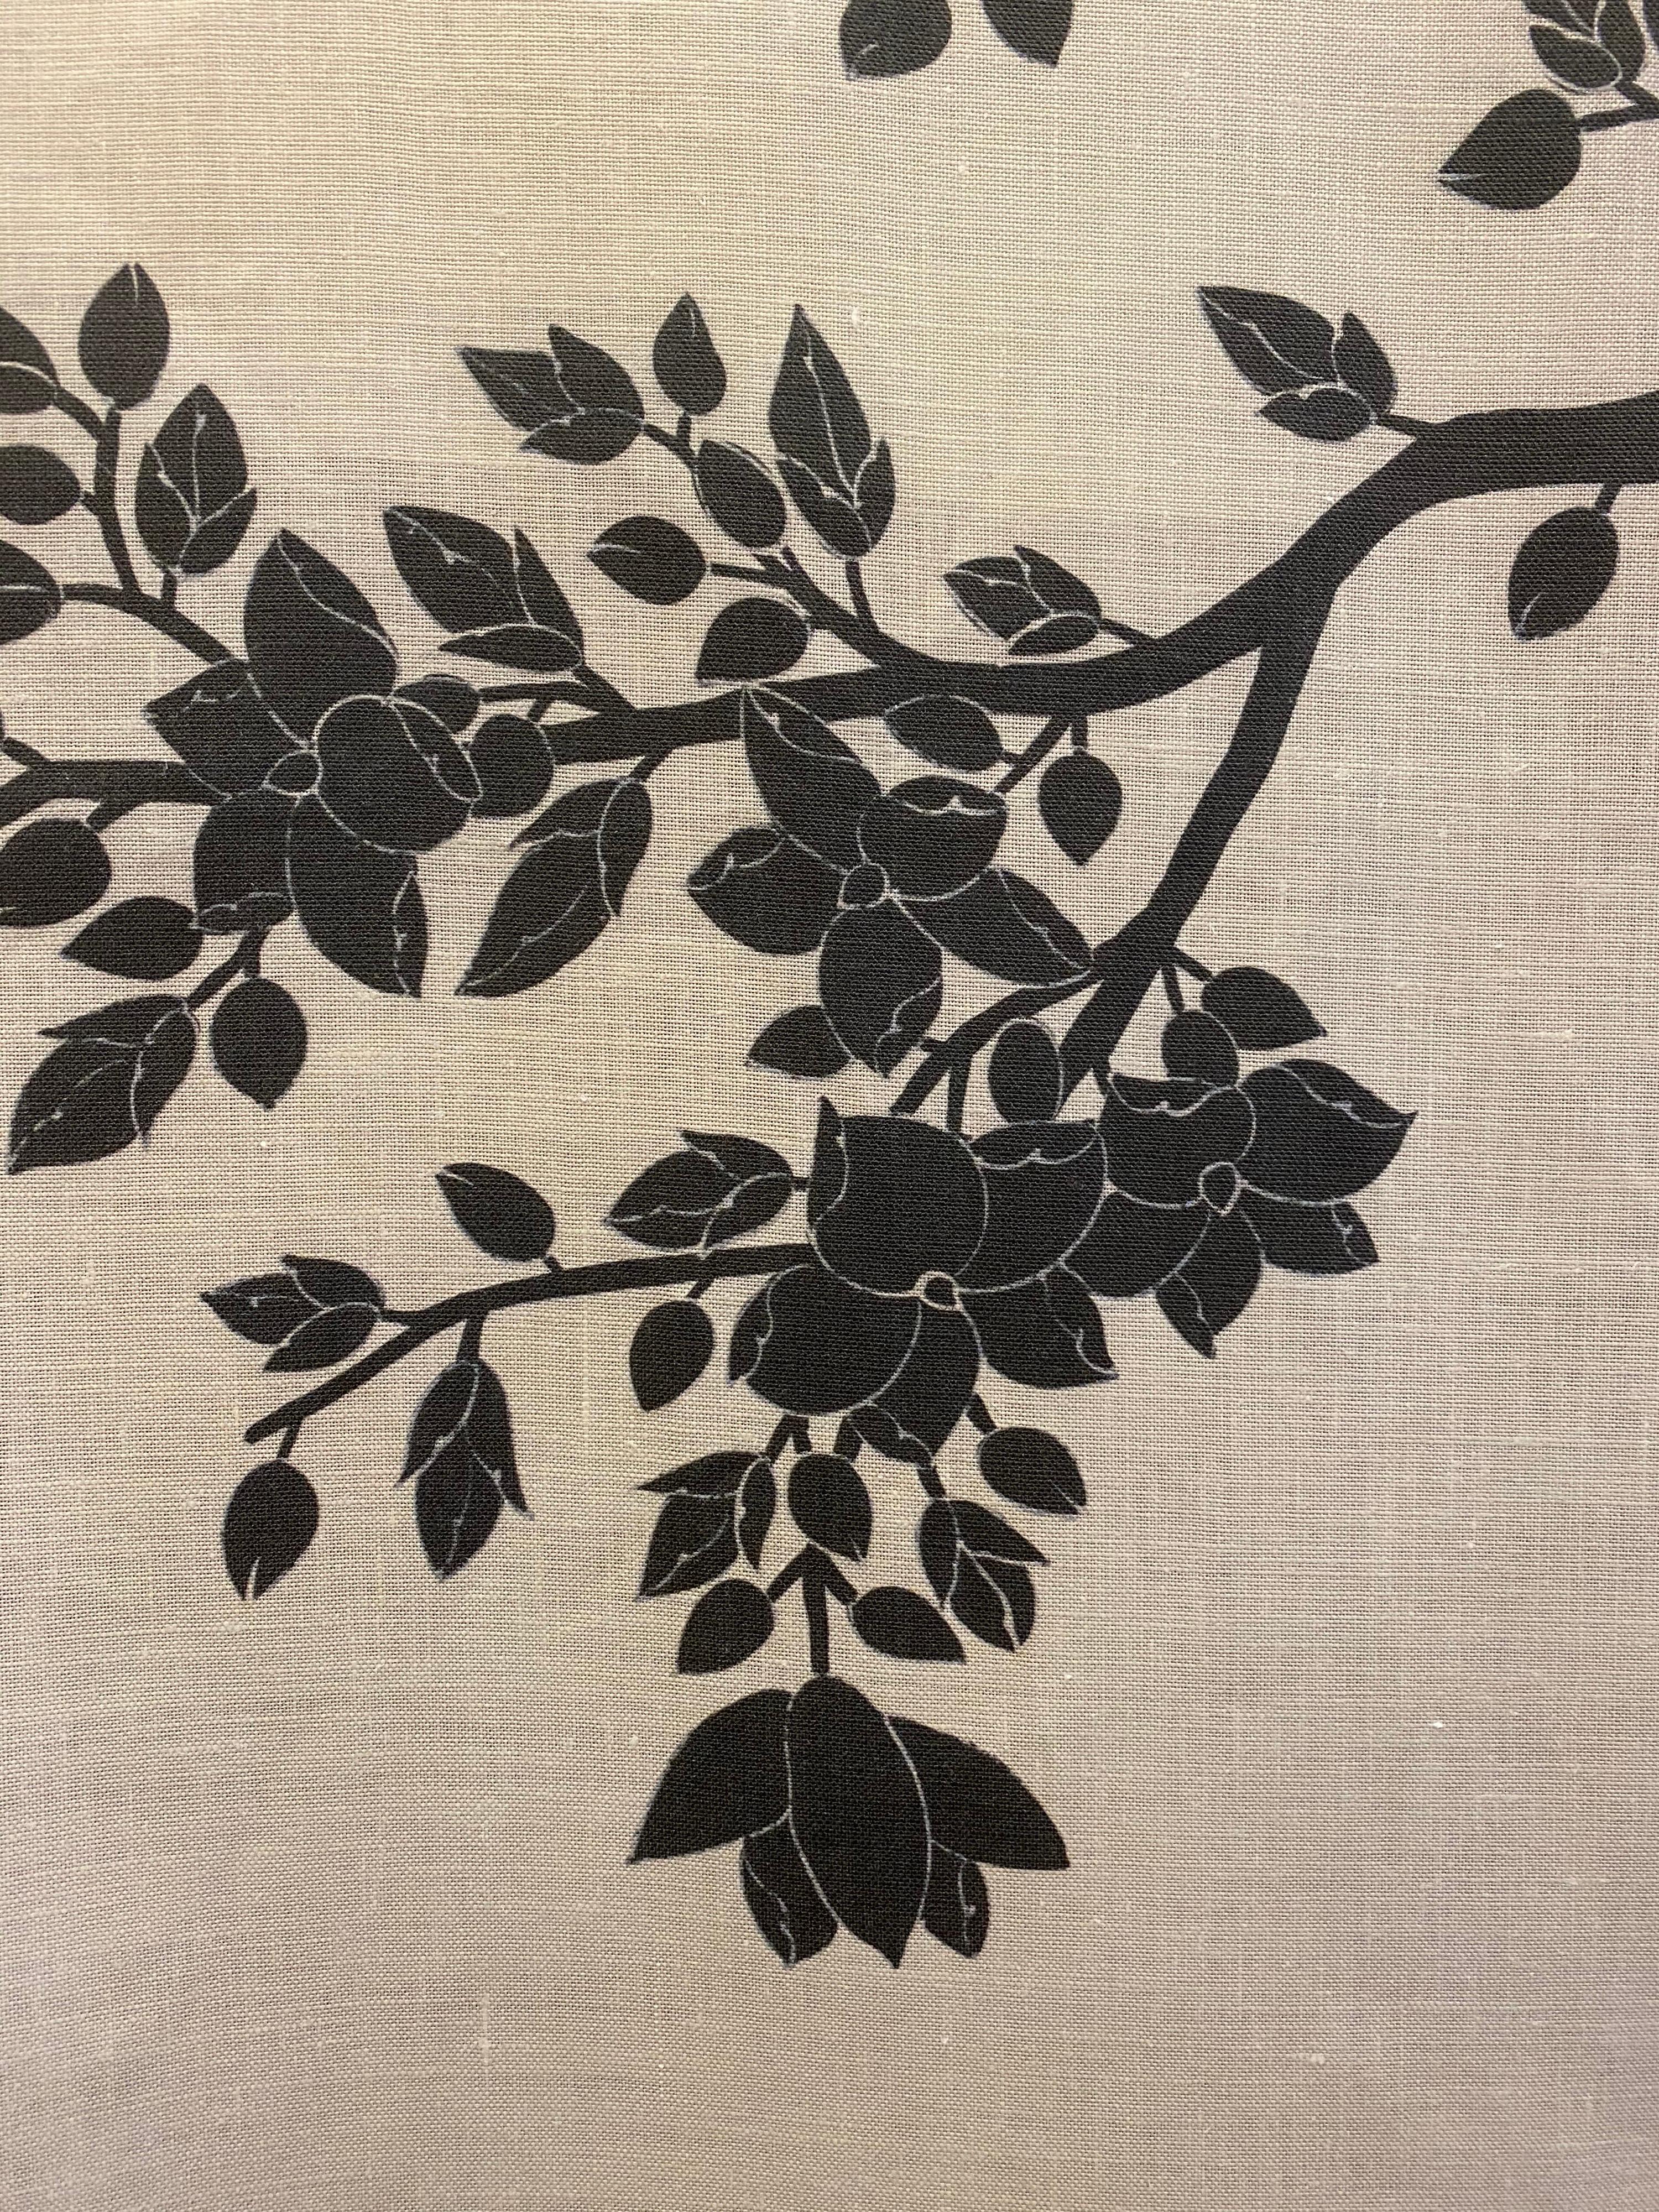 Gracie, the 5th generation firm established in 1898 and known for their exquisite handpainted wallpapers now has a line of linen fabrics featuring six of their iconic patterns.

This is ivory silhouette, a sophisticated black floral pattern on a